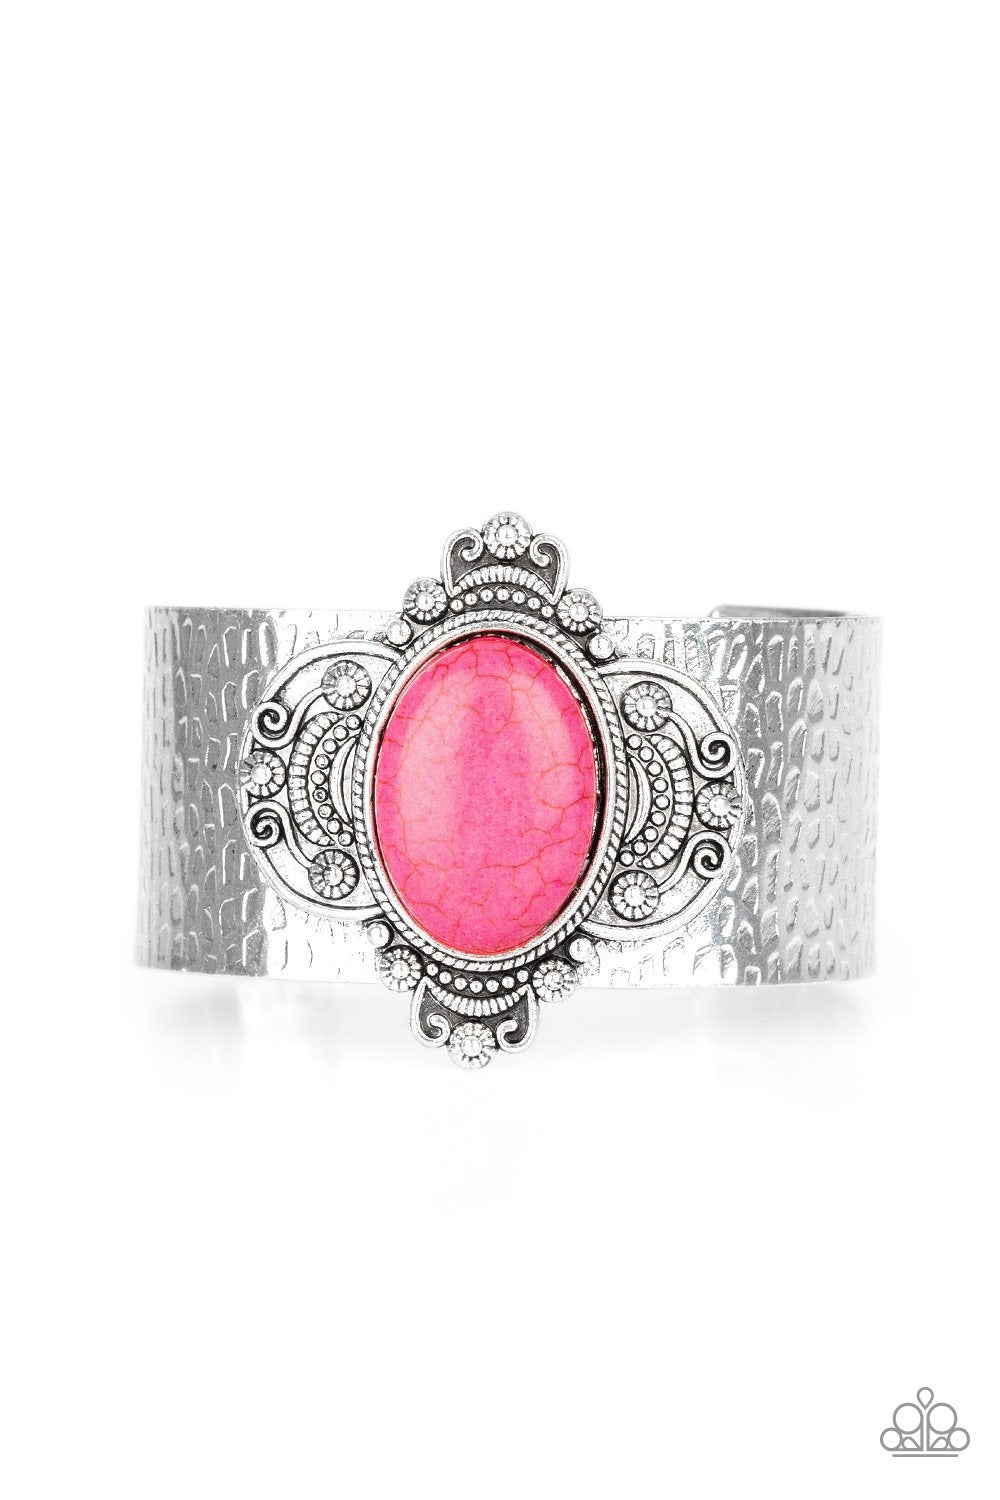 Yes I CANYON Pink Stone and Silver Cuff Bracelet - Paparazzi Accessories-CarasShop.com - $5 Jewelry by Cara Jewels